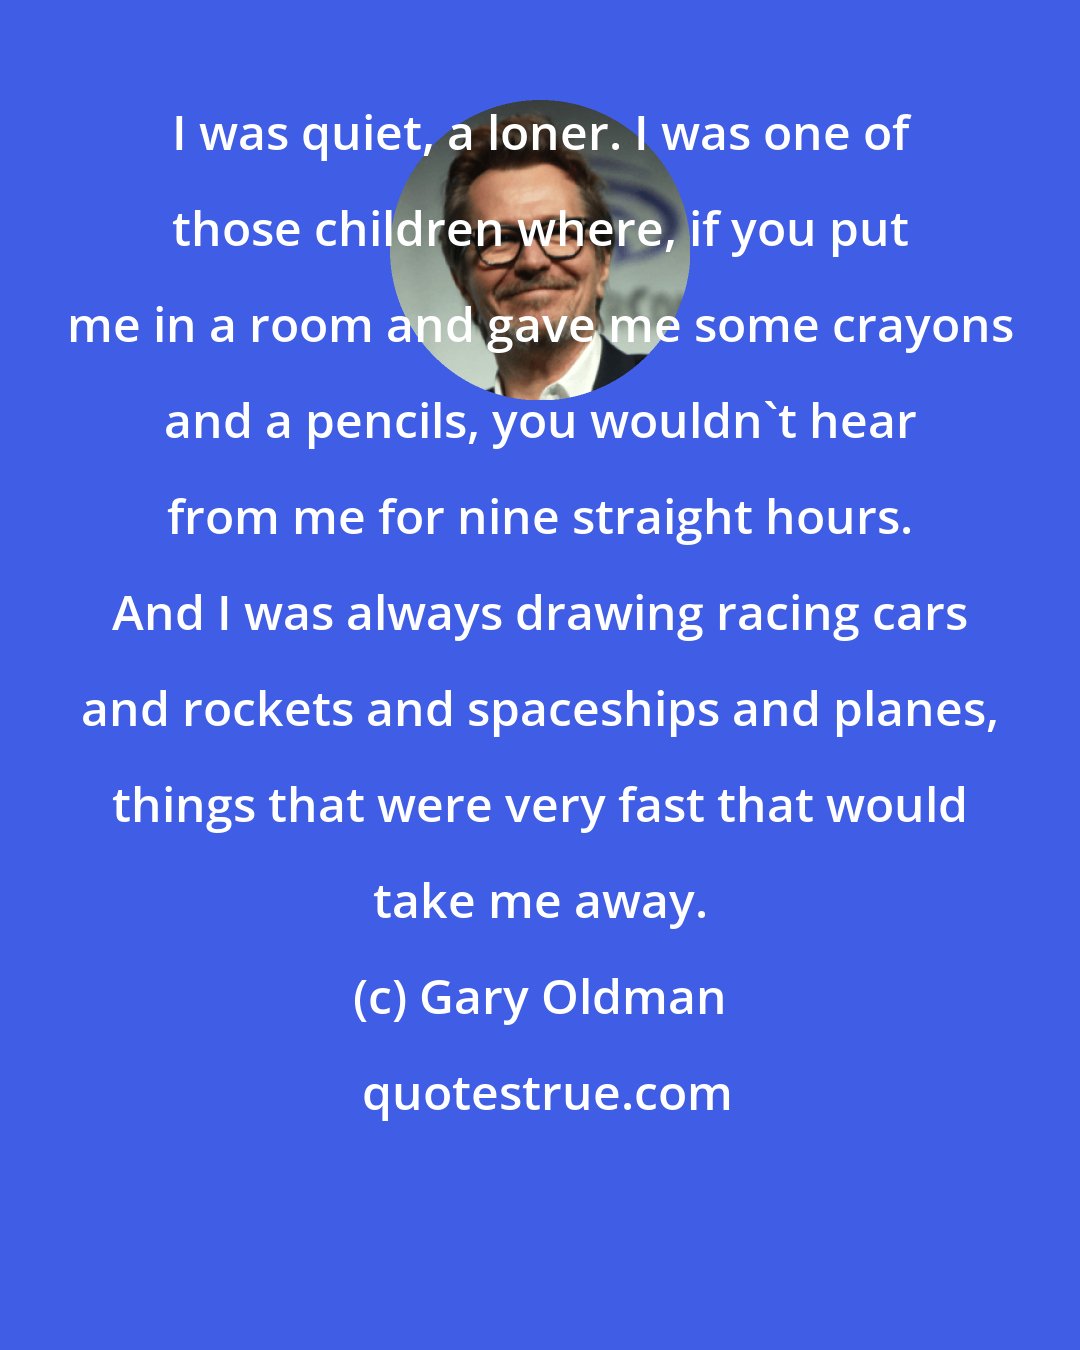 Gary Oldman: I was quiet, a loner. I was one of those children where, if you put me in a room and gave me some crayons and a pencils, you wouldn't hear from me for nine straight hours. And I was always drawing racing cars and rockets and spaceships and planes, things that were very fast that would take me away.